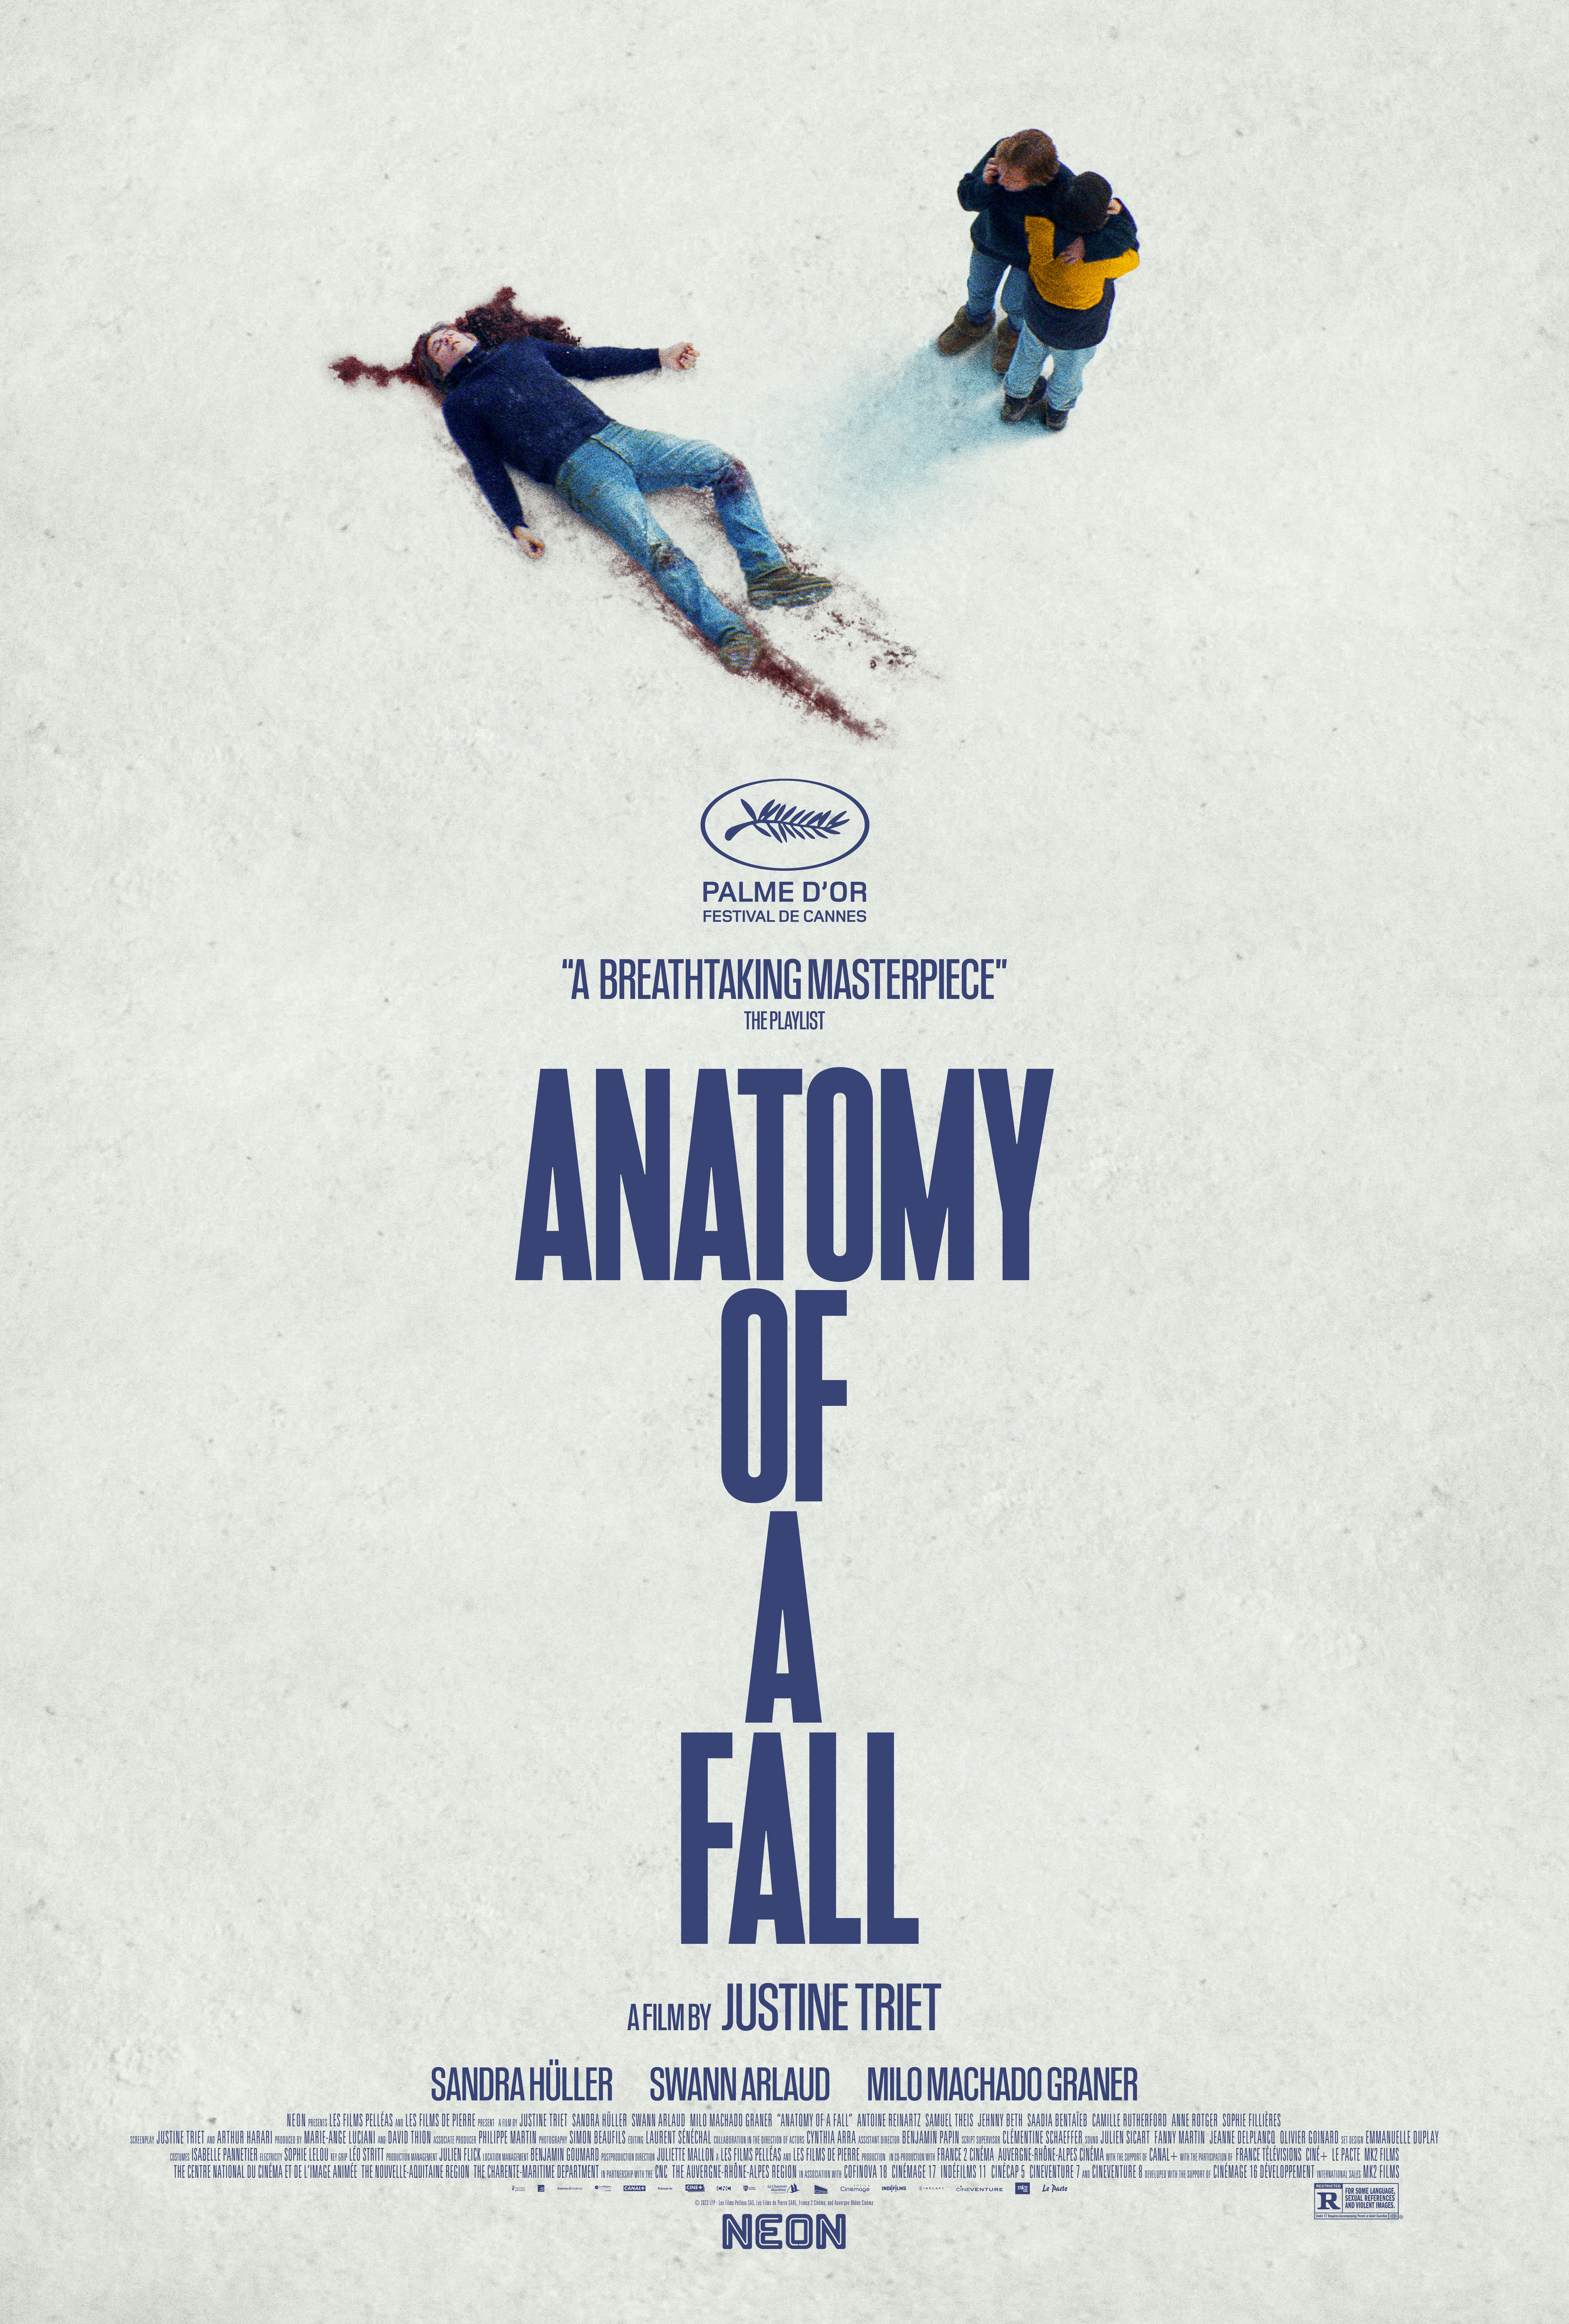 An image shot overhead with a young person lying in the snow with blood surround them. Two distraught people look onward. The title, "Anatomy of a Fall," is displayed on the lower half.